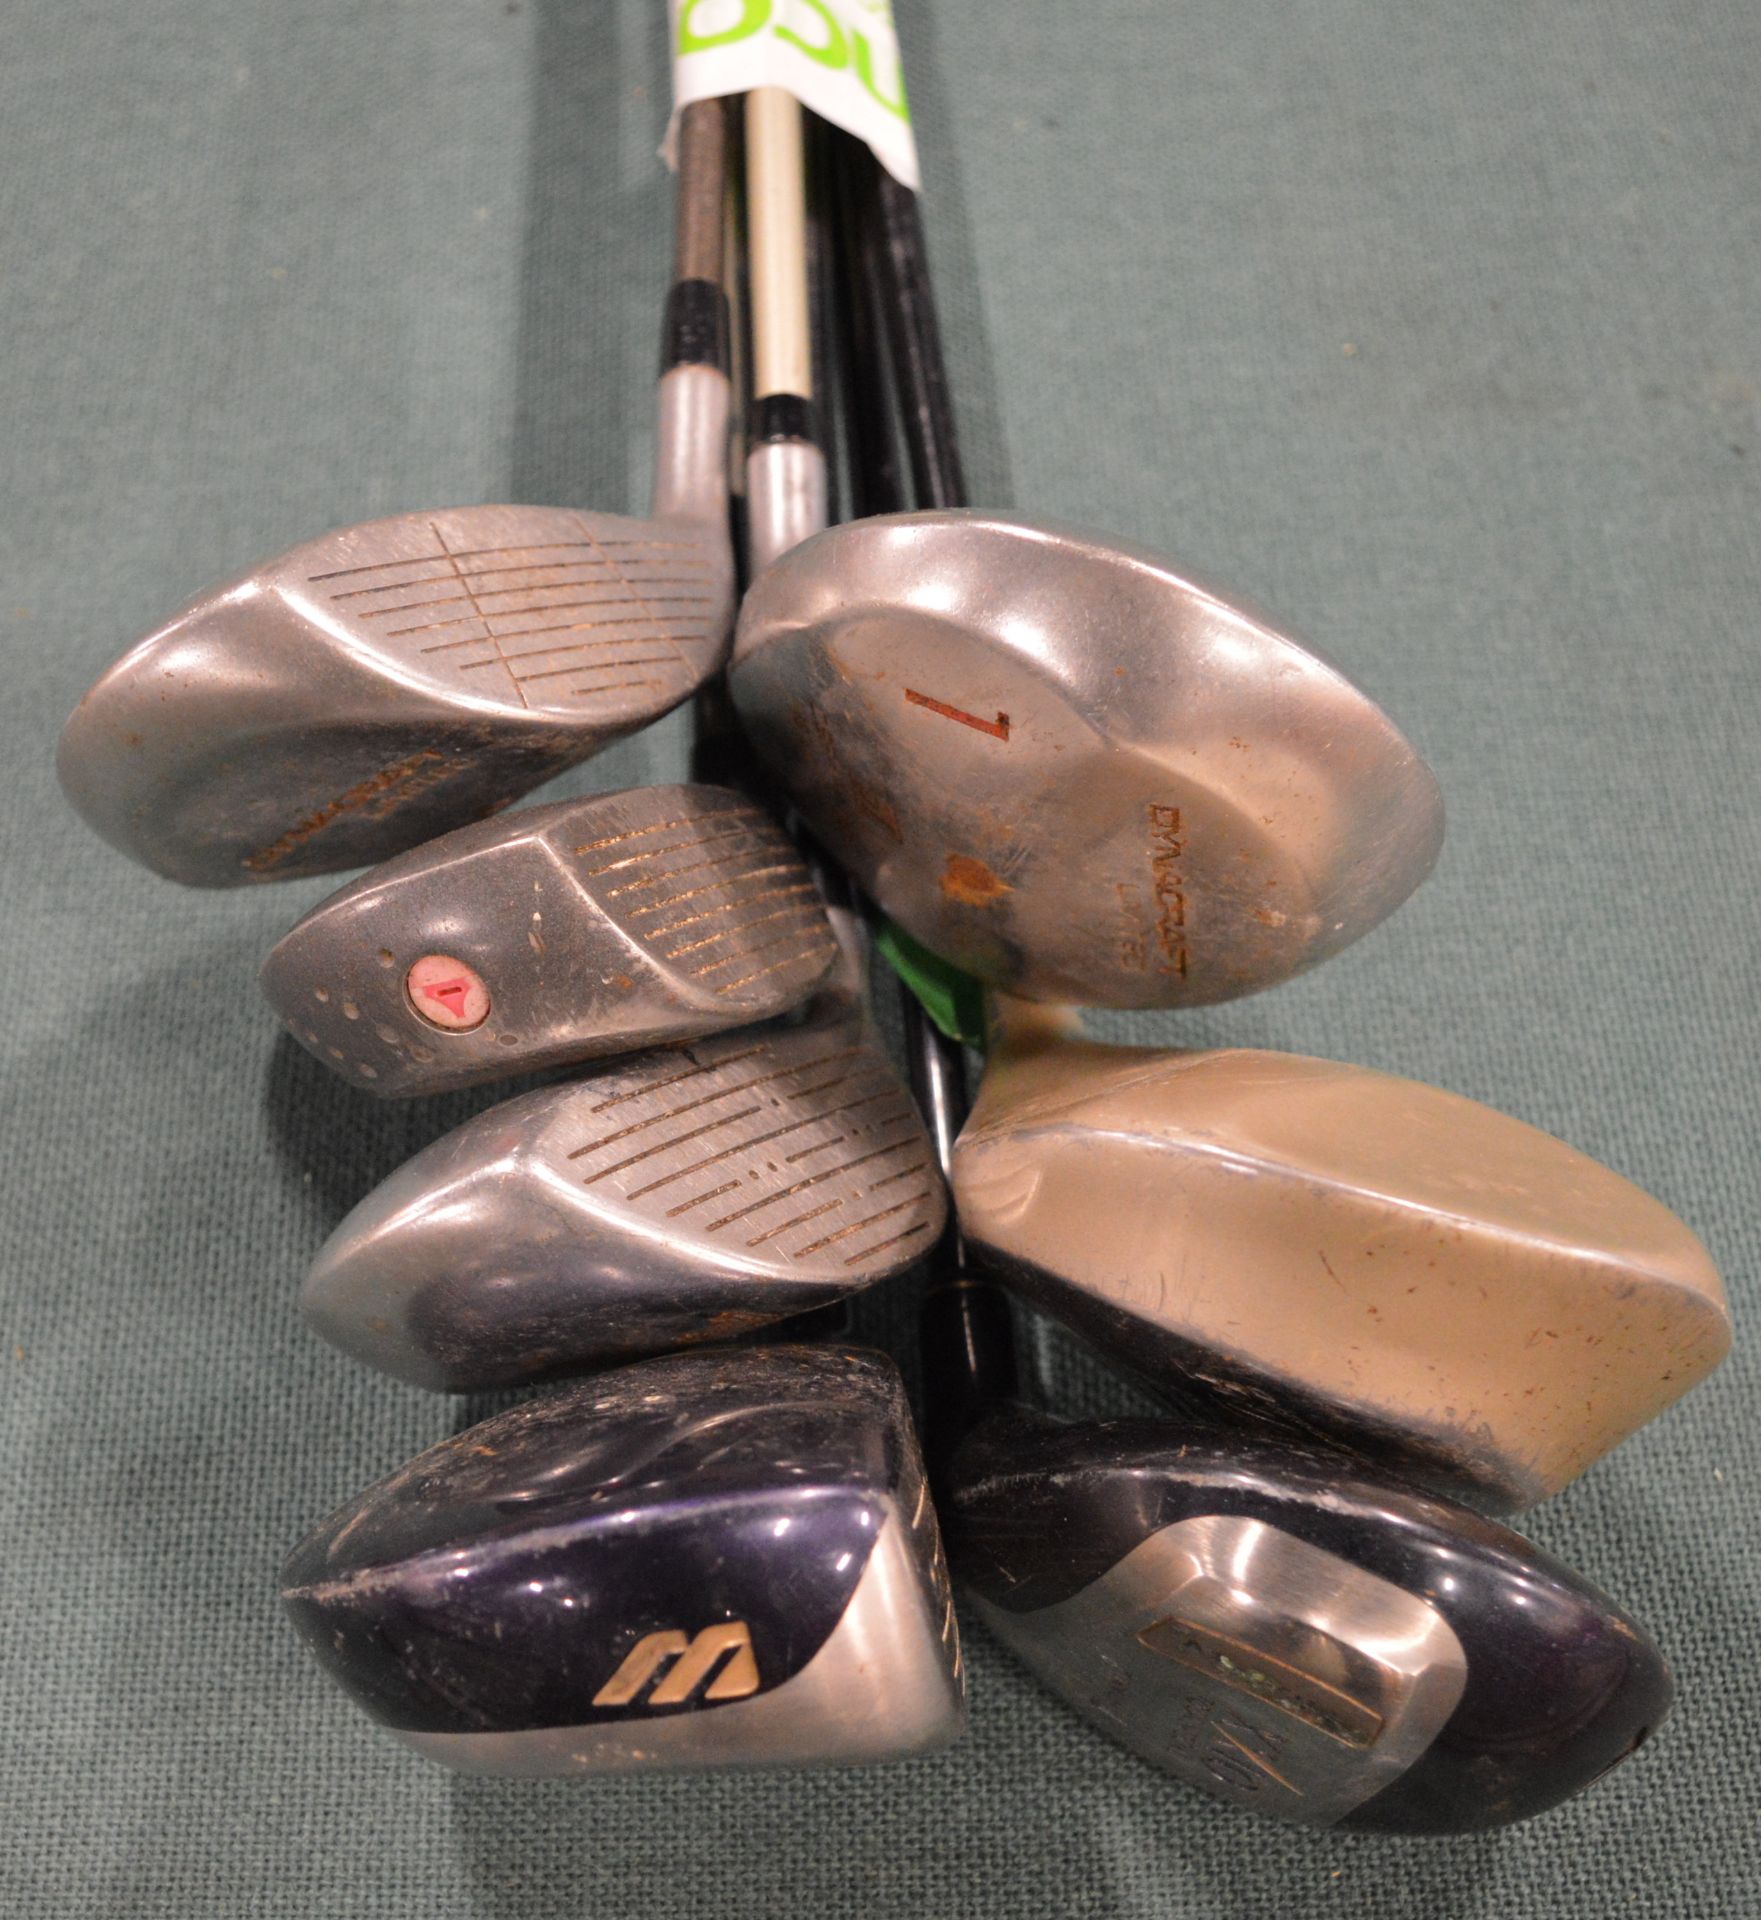 7x Golf Clubs - Drivers. - Image 2 of 2